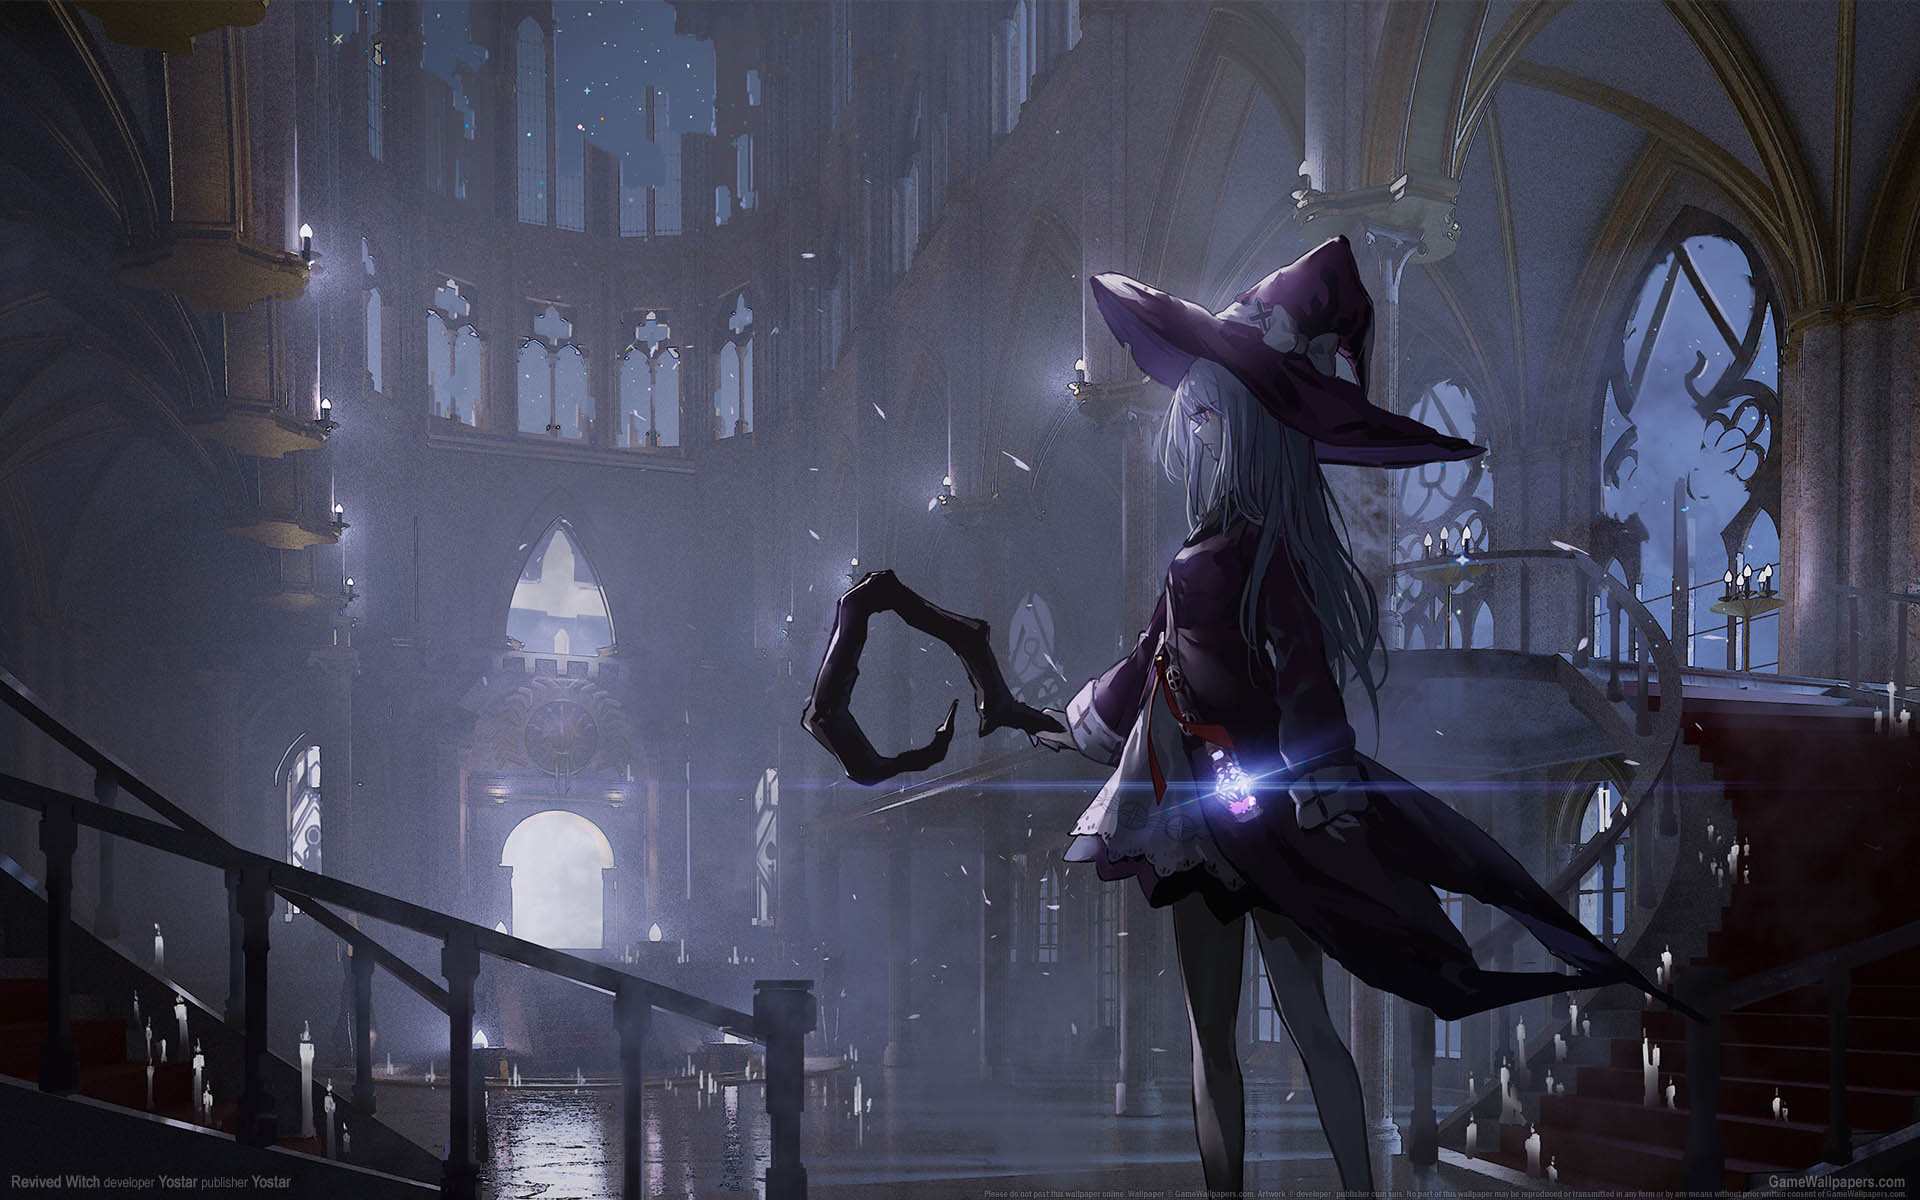 Revived Witch fond d'cran 01 1920x1200